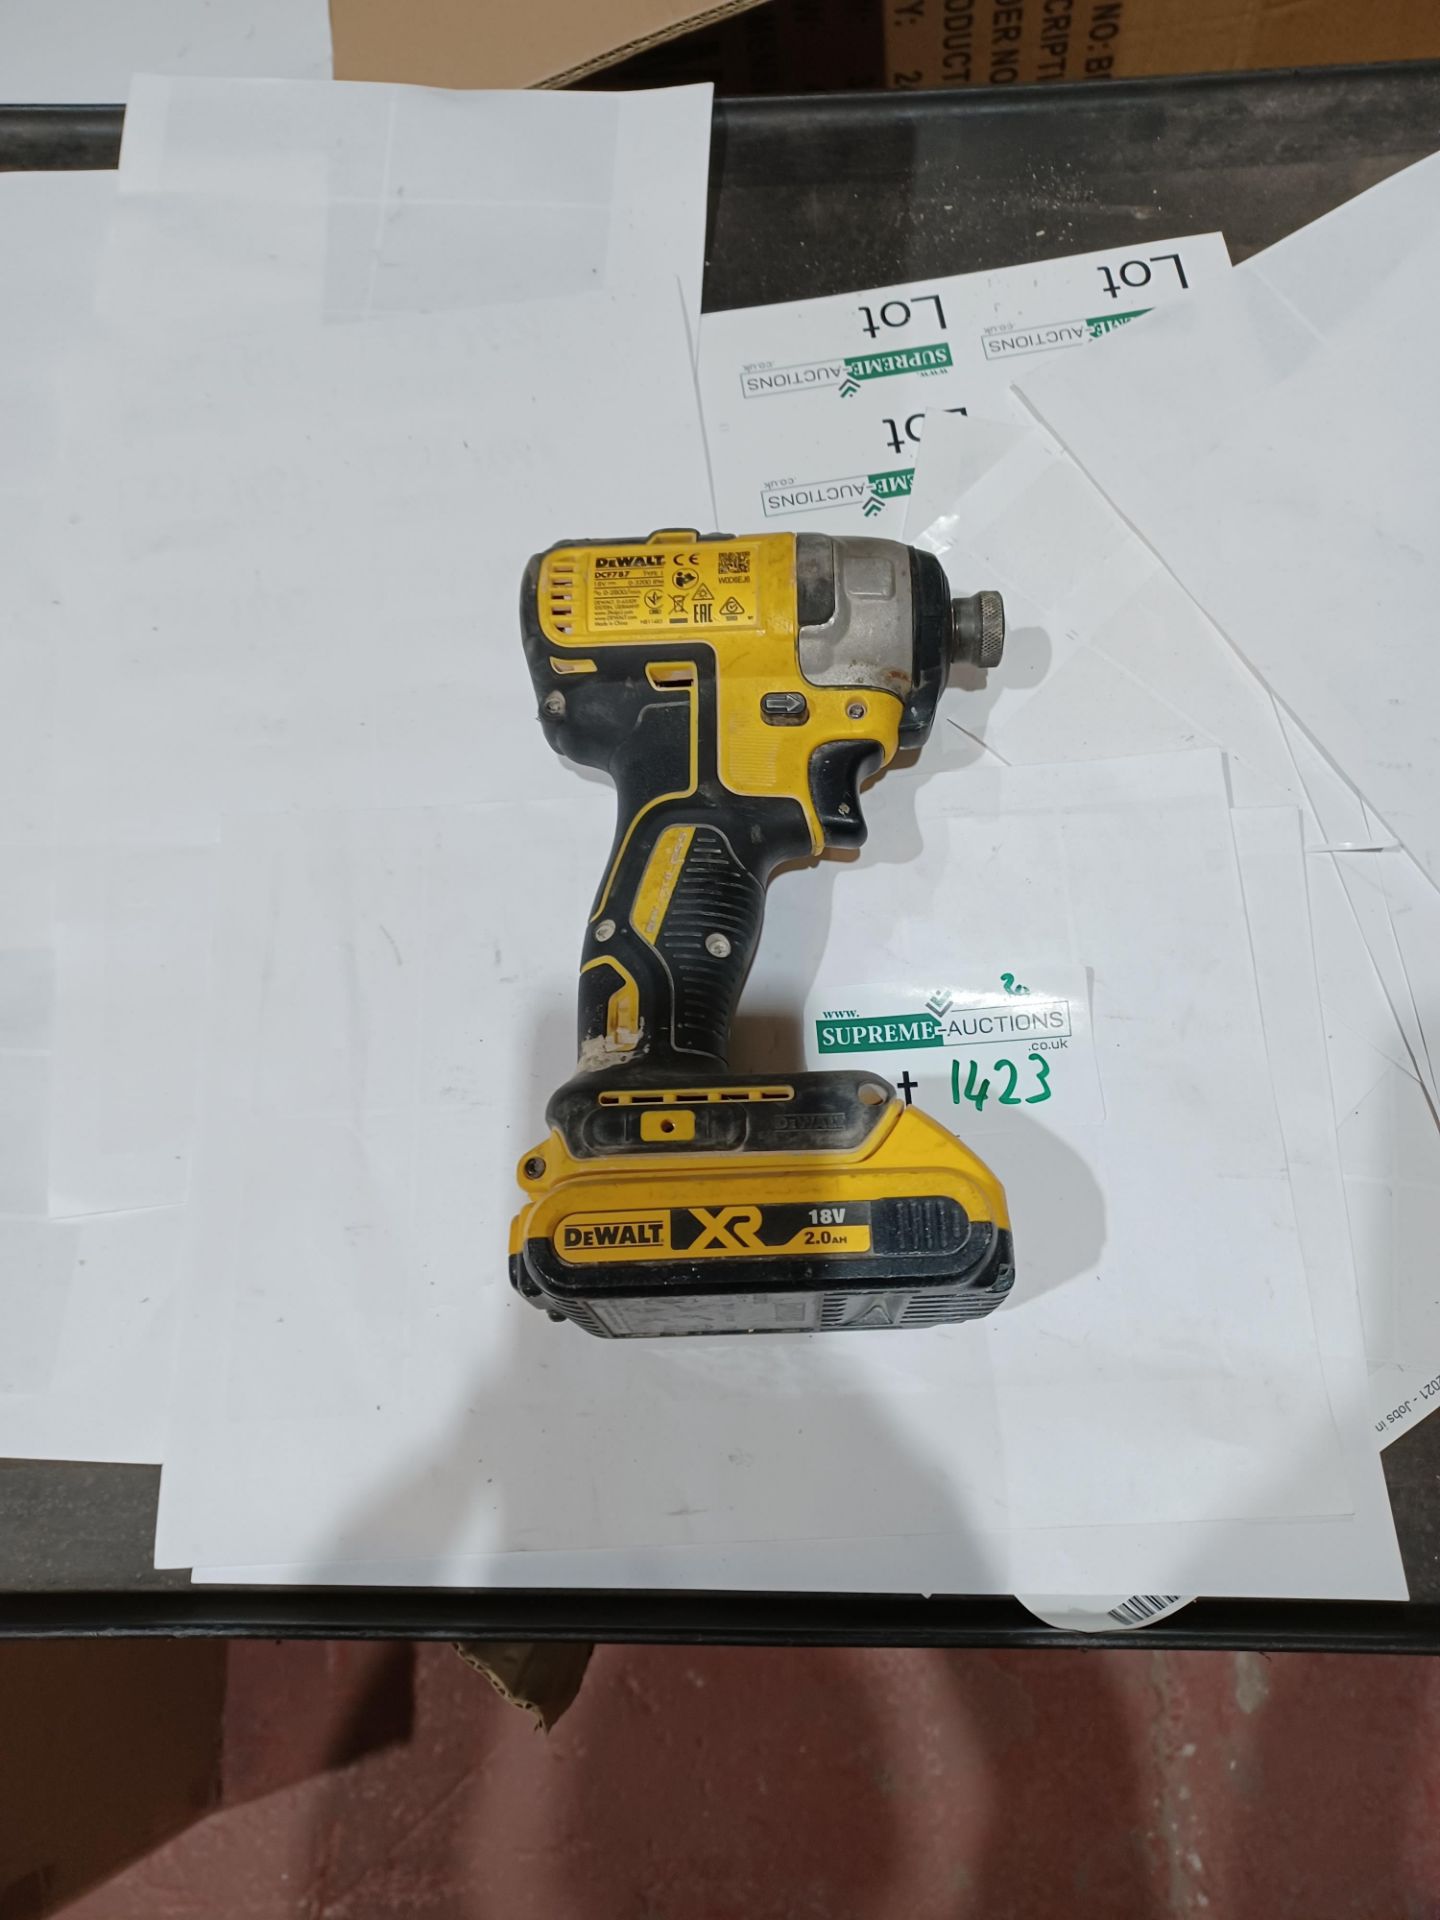 DEWALT DCF787N-XJ 18V LI-ION XR BRUSHLESS CORDLESS IMPACT DRIVER - BARE WITH BATTERY UNCHECKED/